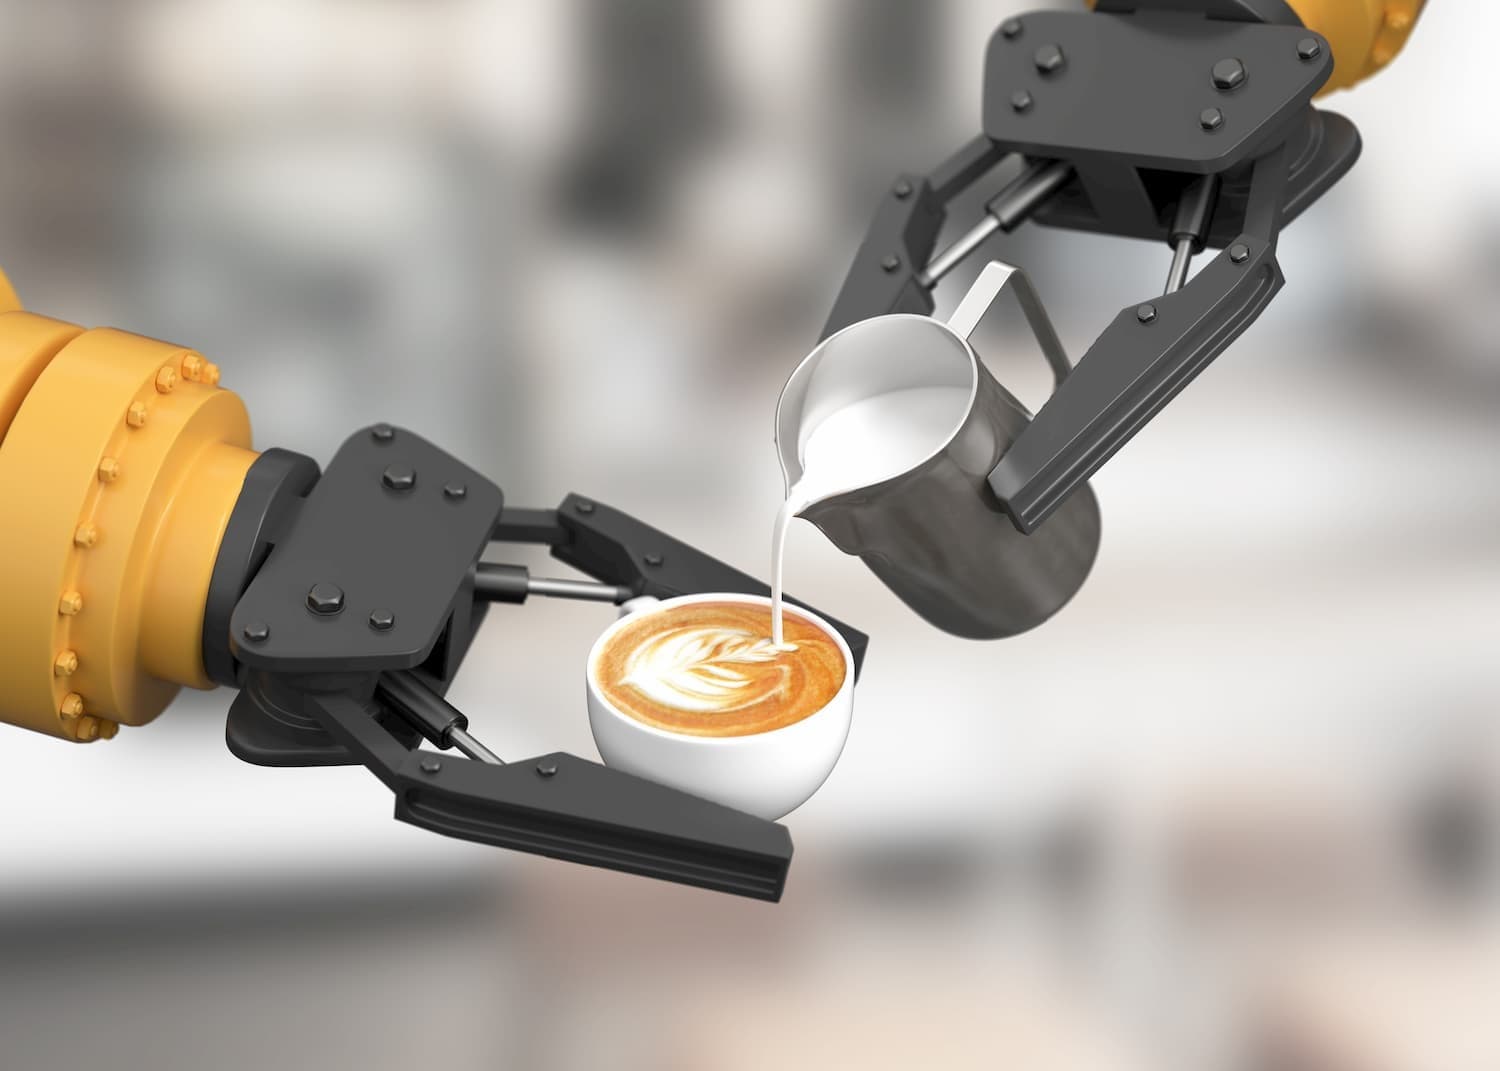 Dealing with Digital Disruption: How the coffee industry is using it to its advantage